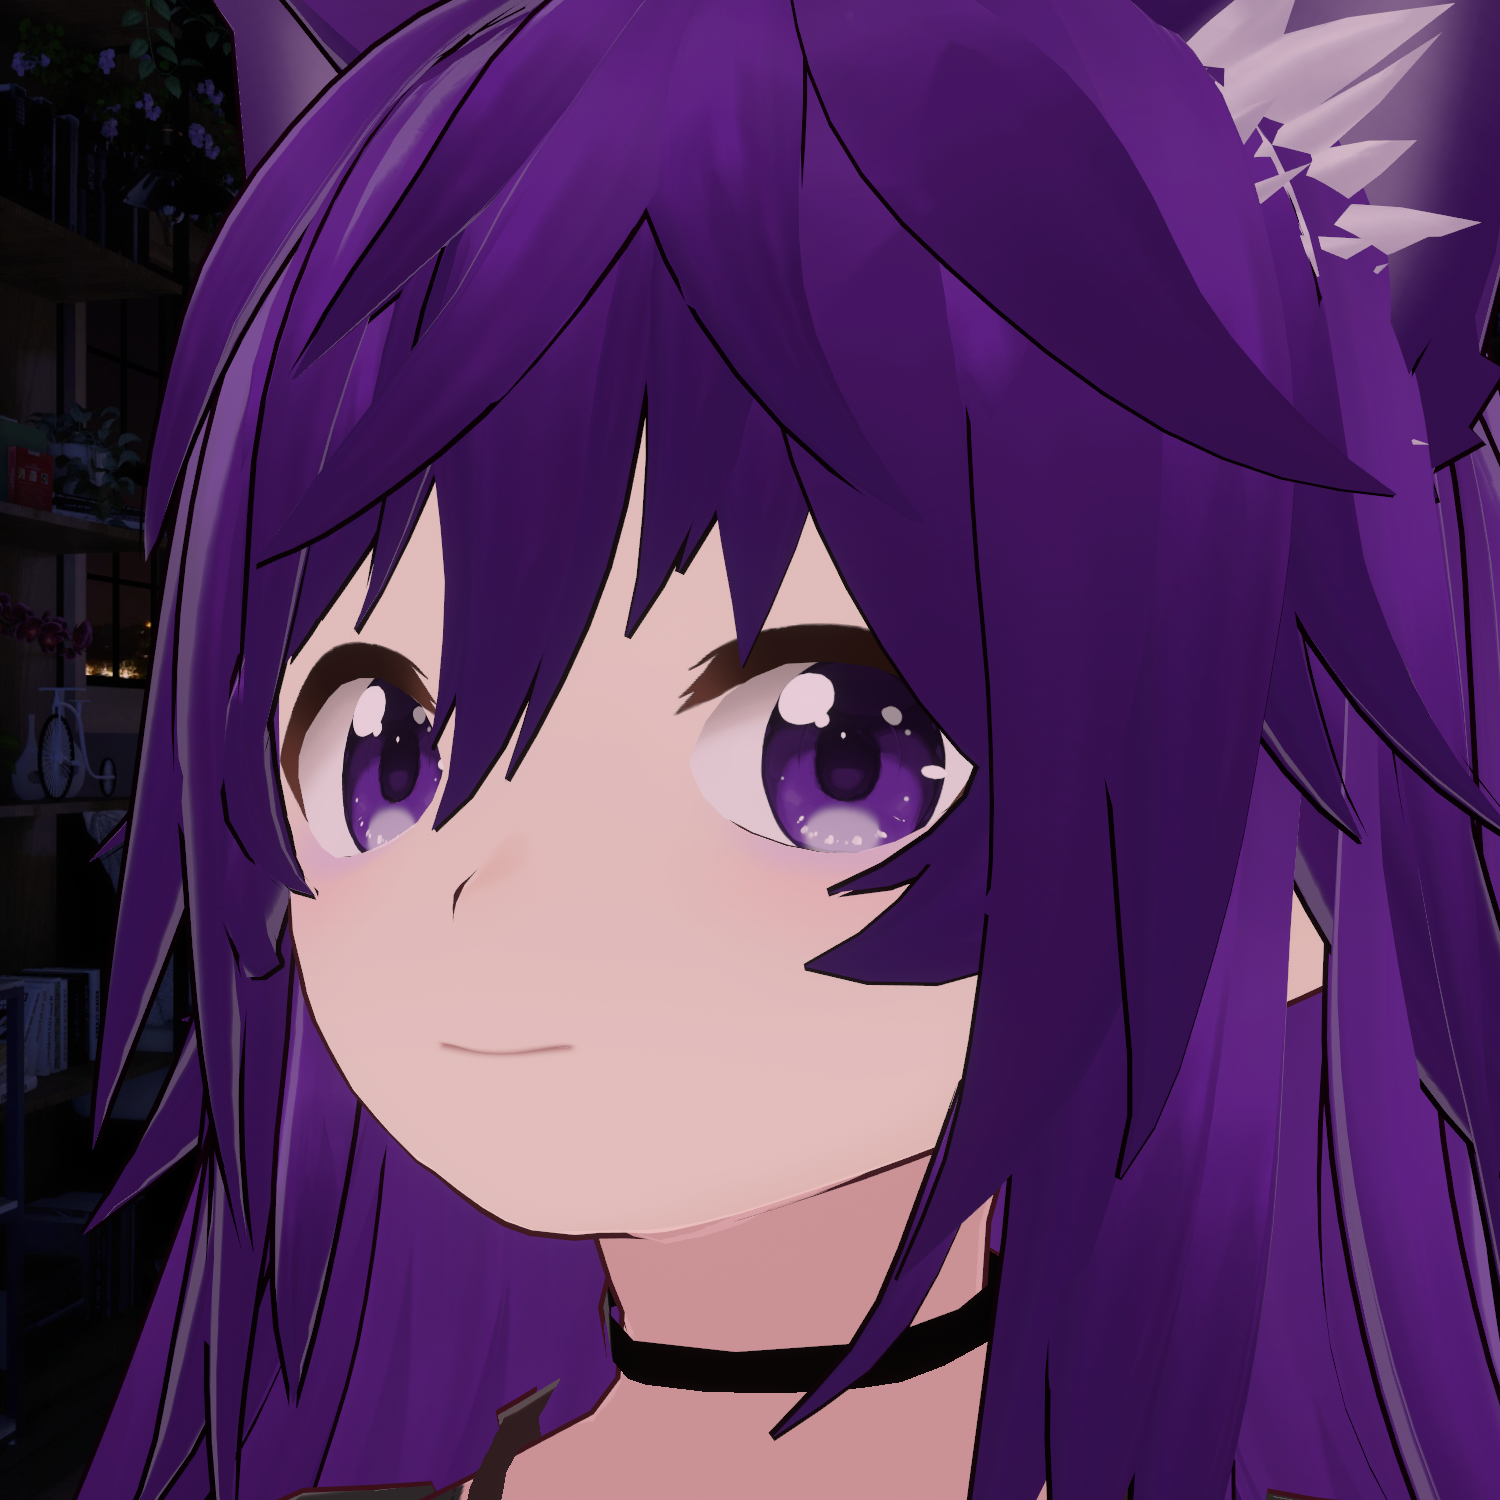 April's profile picture, depicting her v-tuber character, a catgirl with purple hair